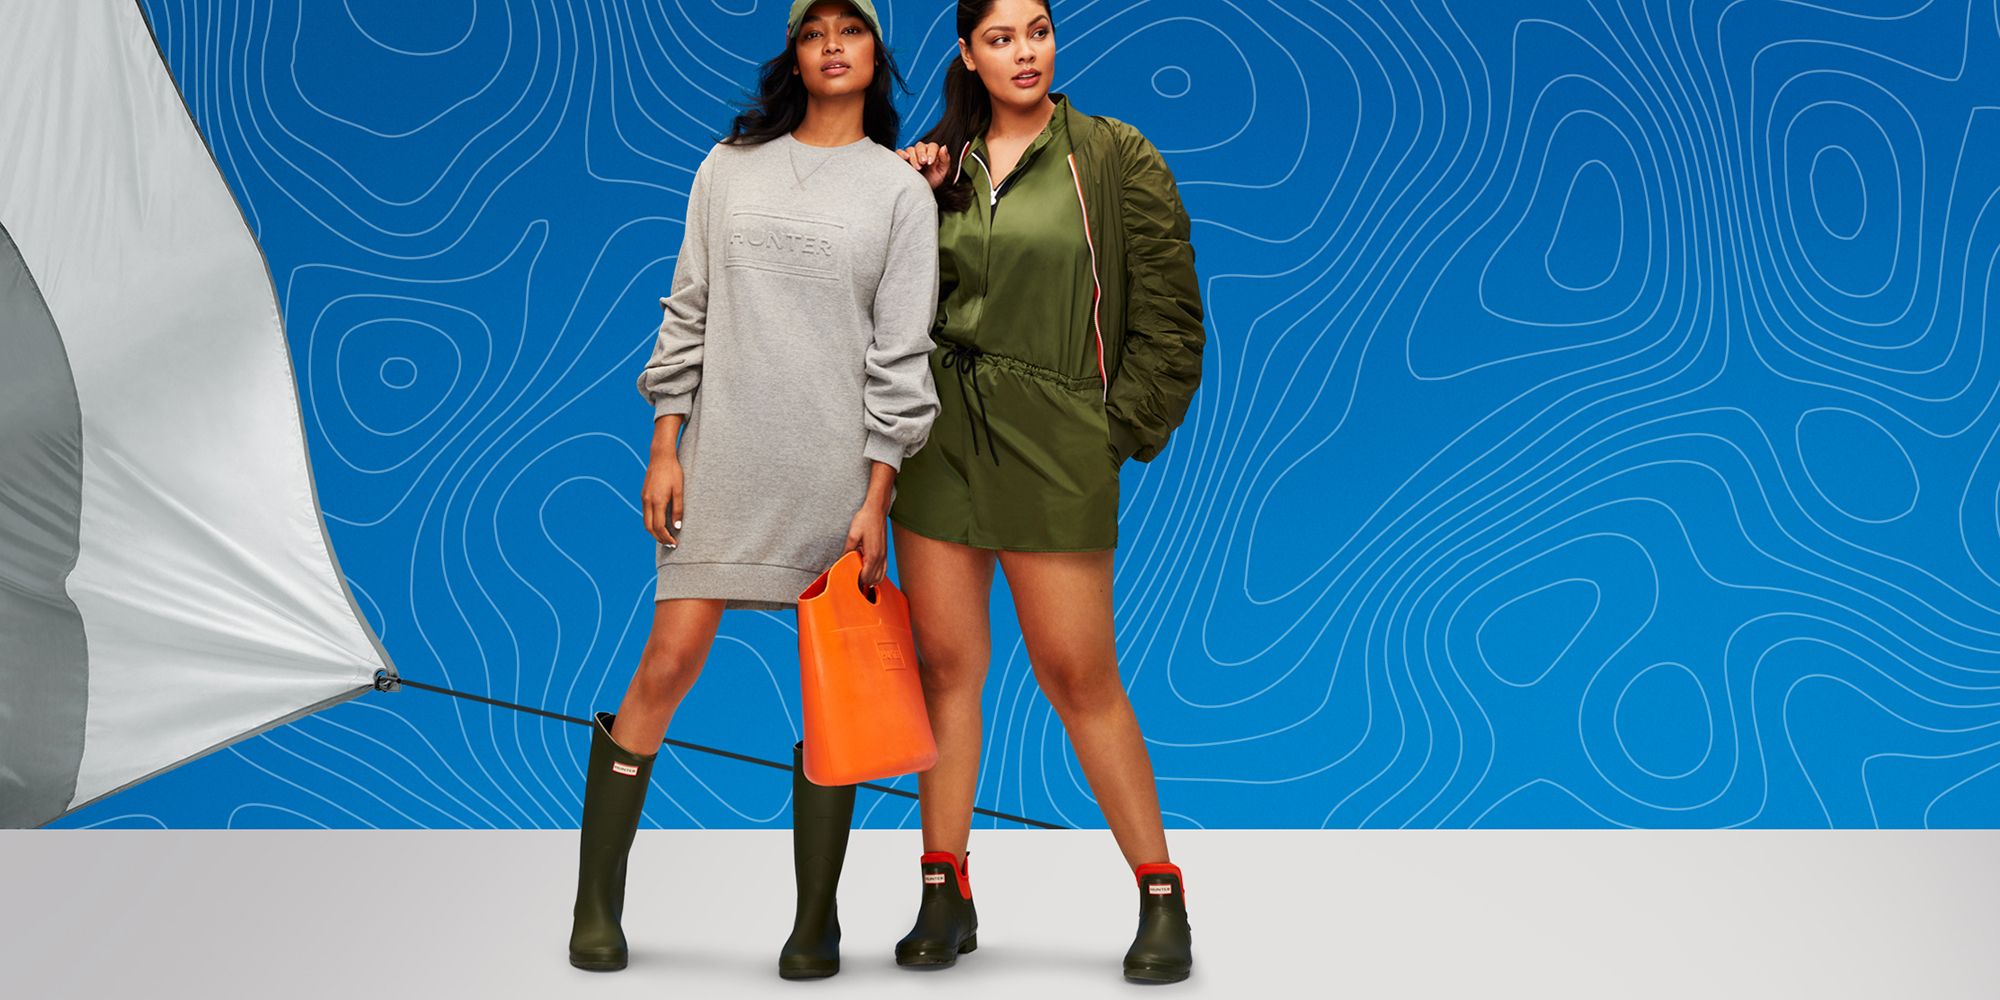 hunter boots by target